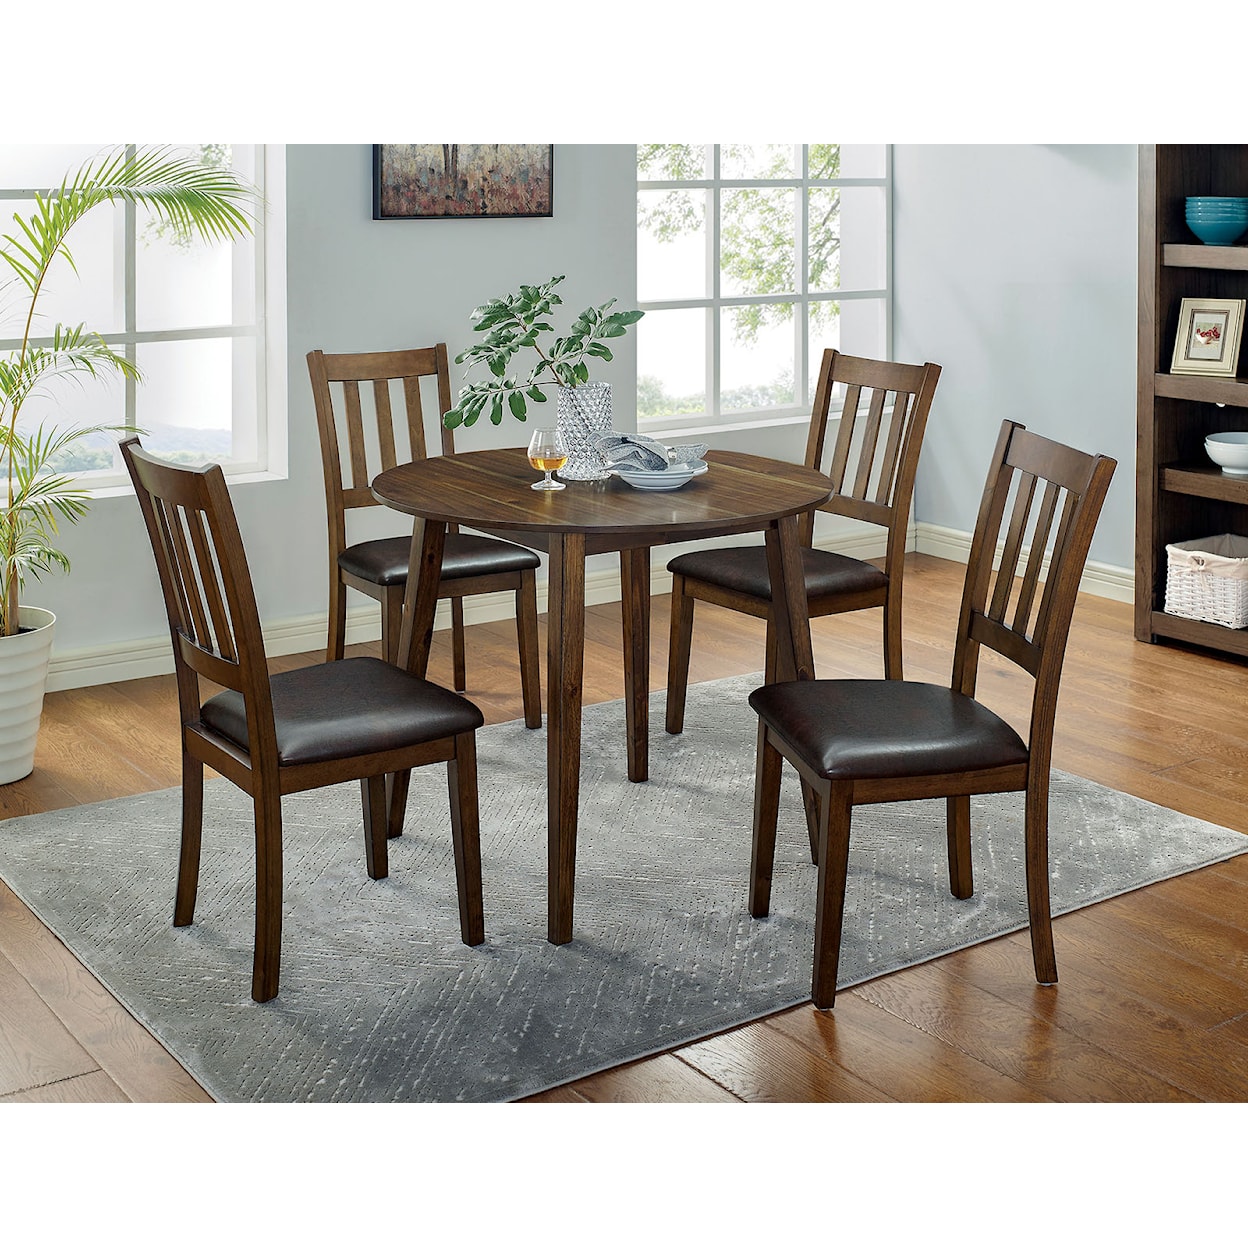 Furniture of America Blackwood 5-Piece Round Dining Table Set